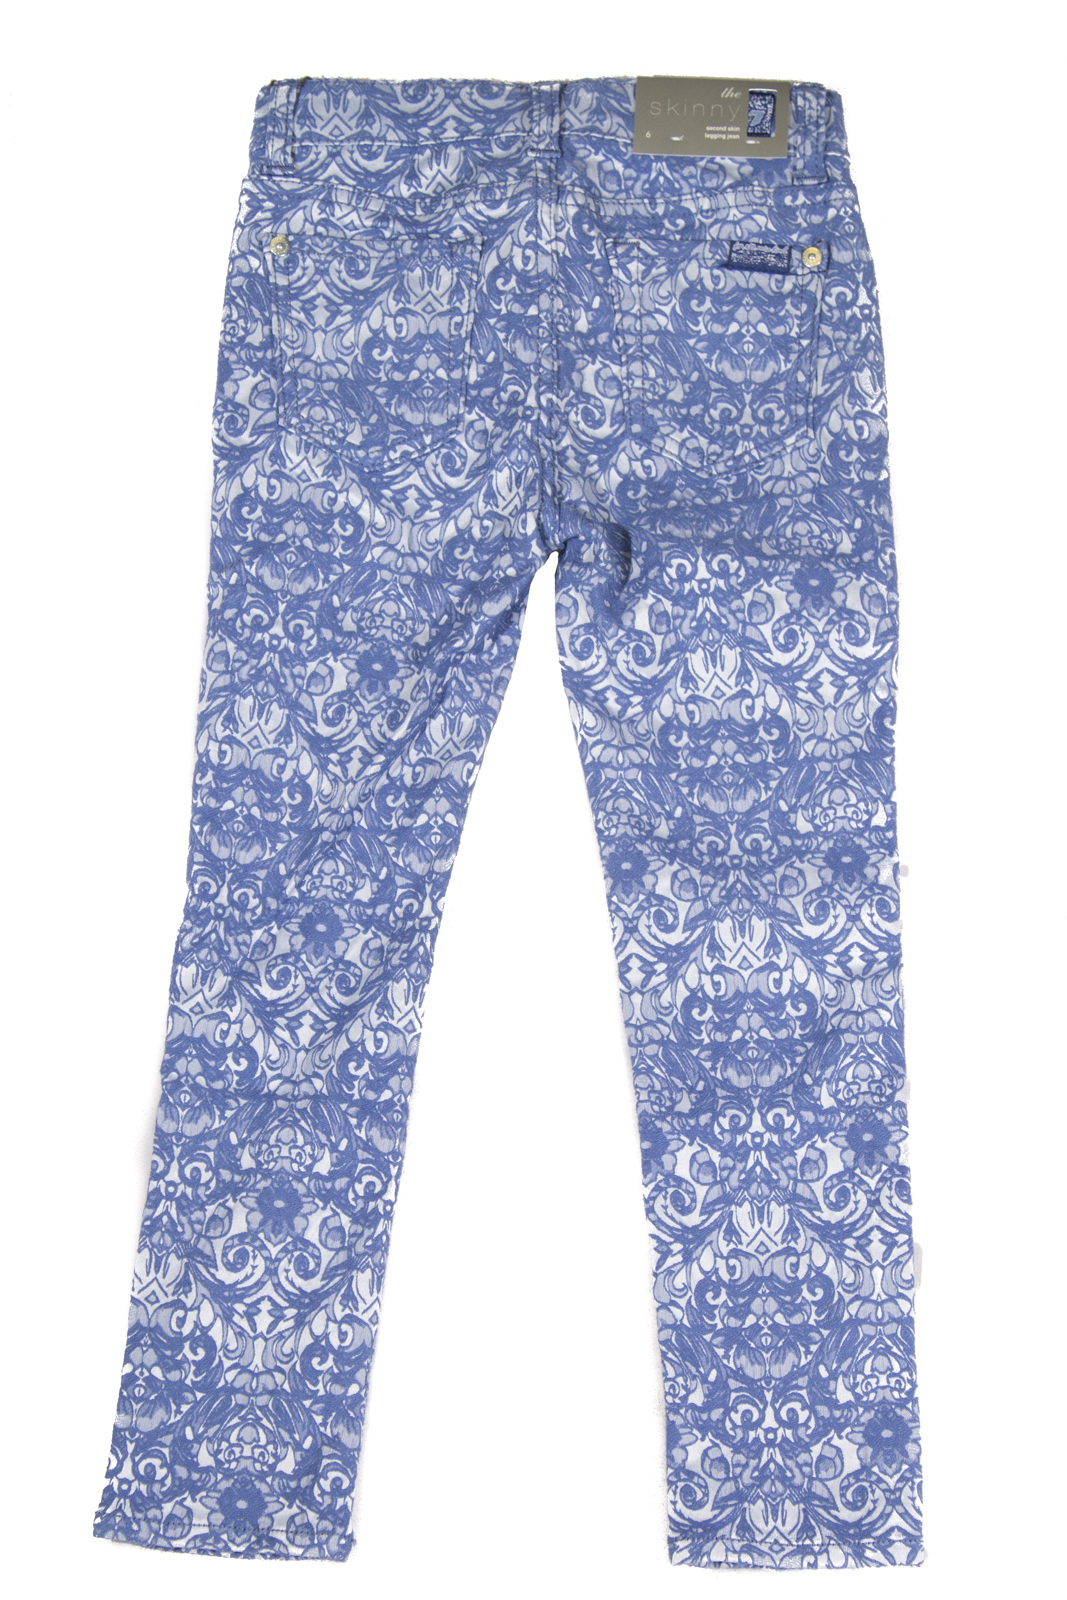 7 for All Mankind Girls Moroccan Jacquard Skinny Legging Jeans 7FFXG2161 $79 NEW